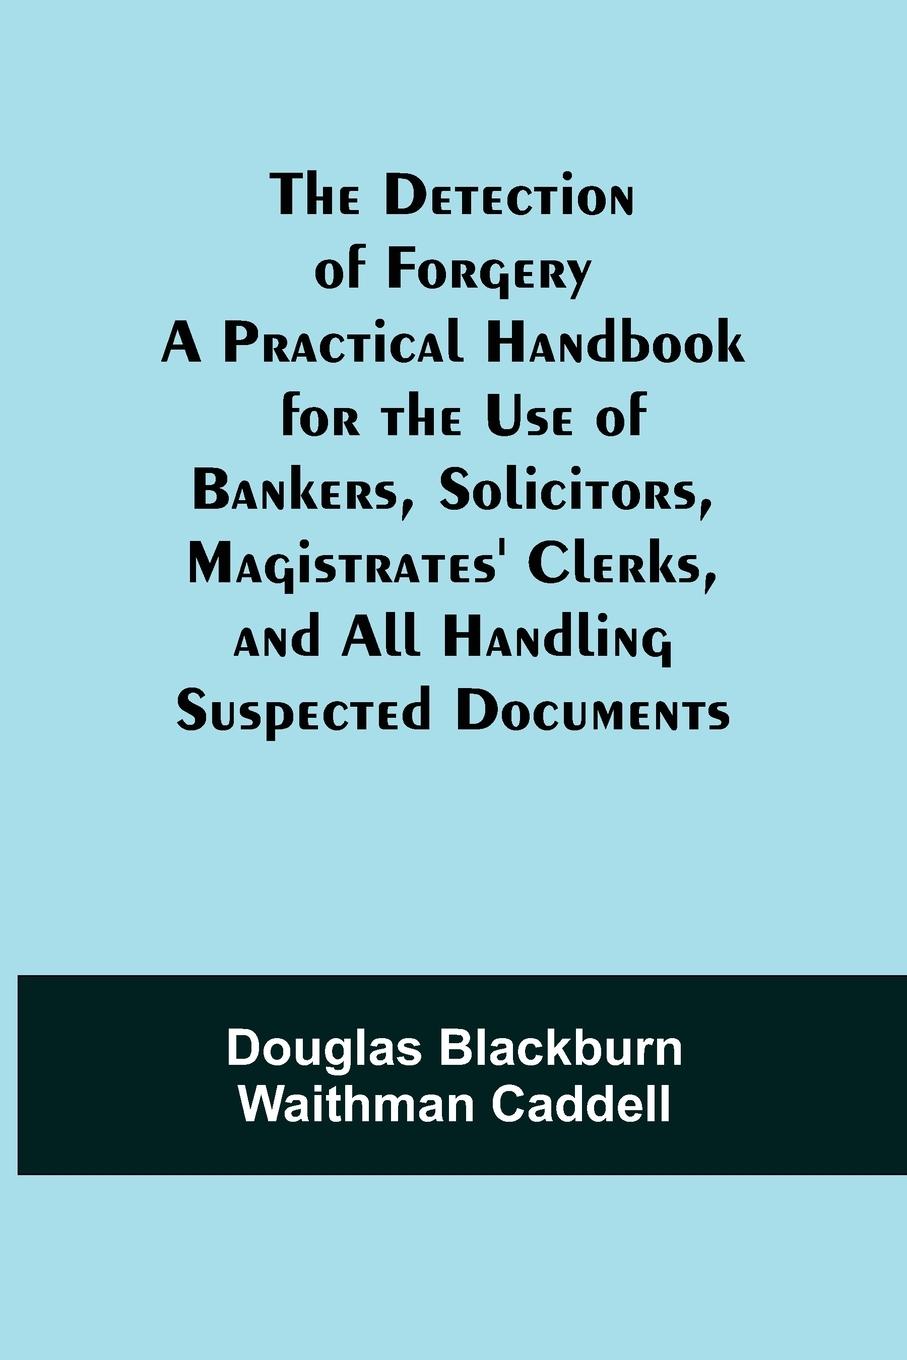 The Detection of Forgery A Practical Handbook for the Use of Bankers, Solicitors,Magistrates  Clerks, and All Handling Suspected Documents - Blackburn Waithman Caddell, Douglas